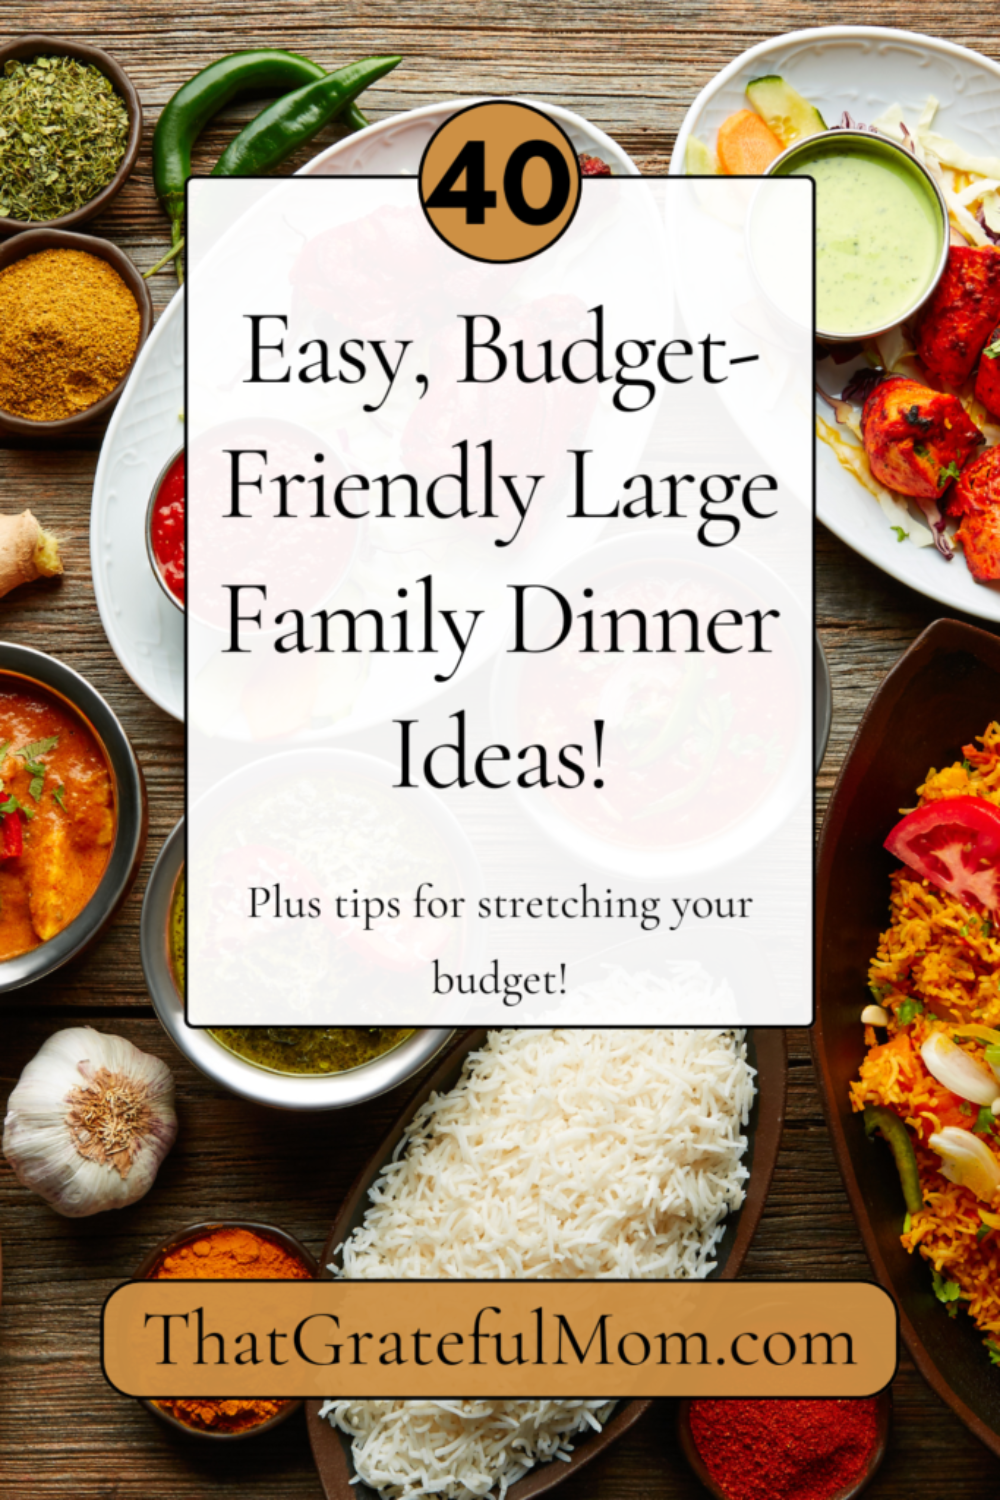 Large Family Dinner Ideas pin 1